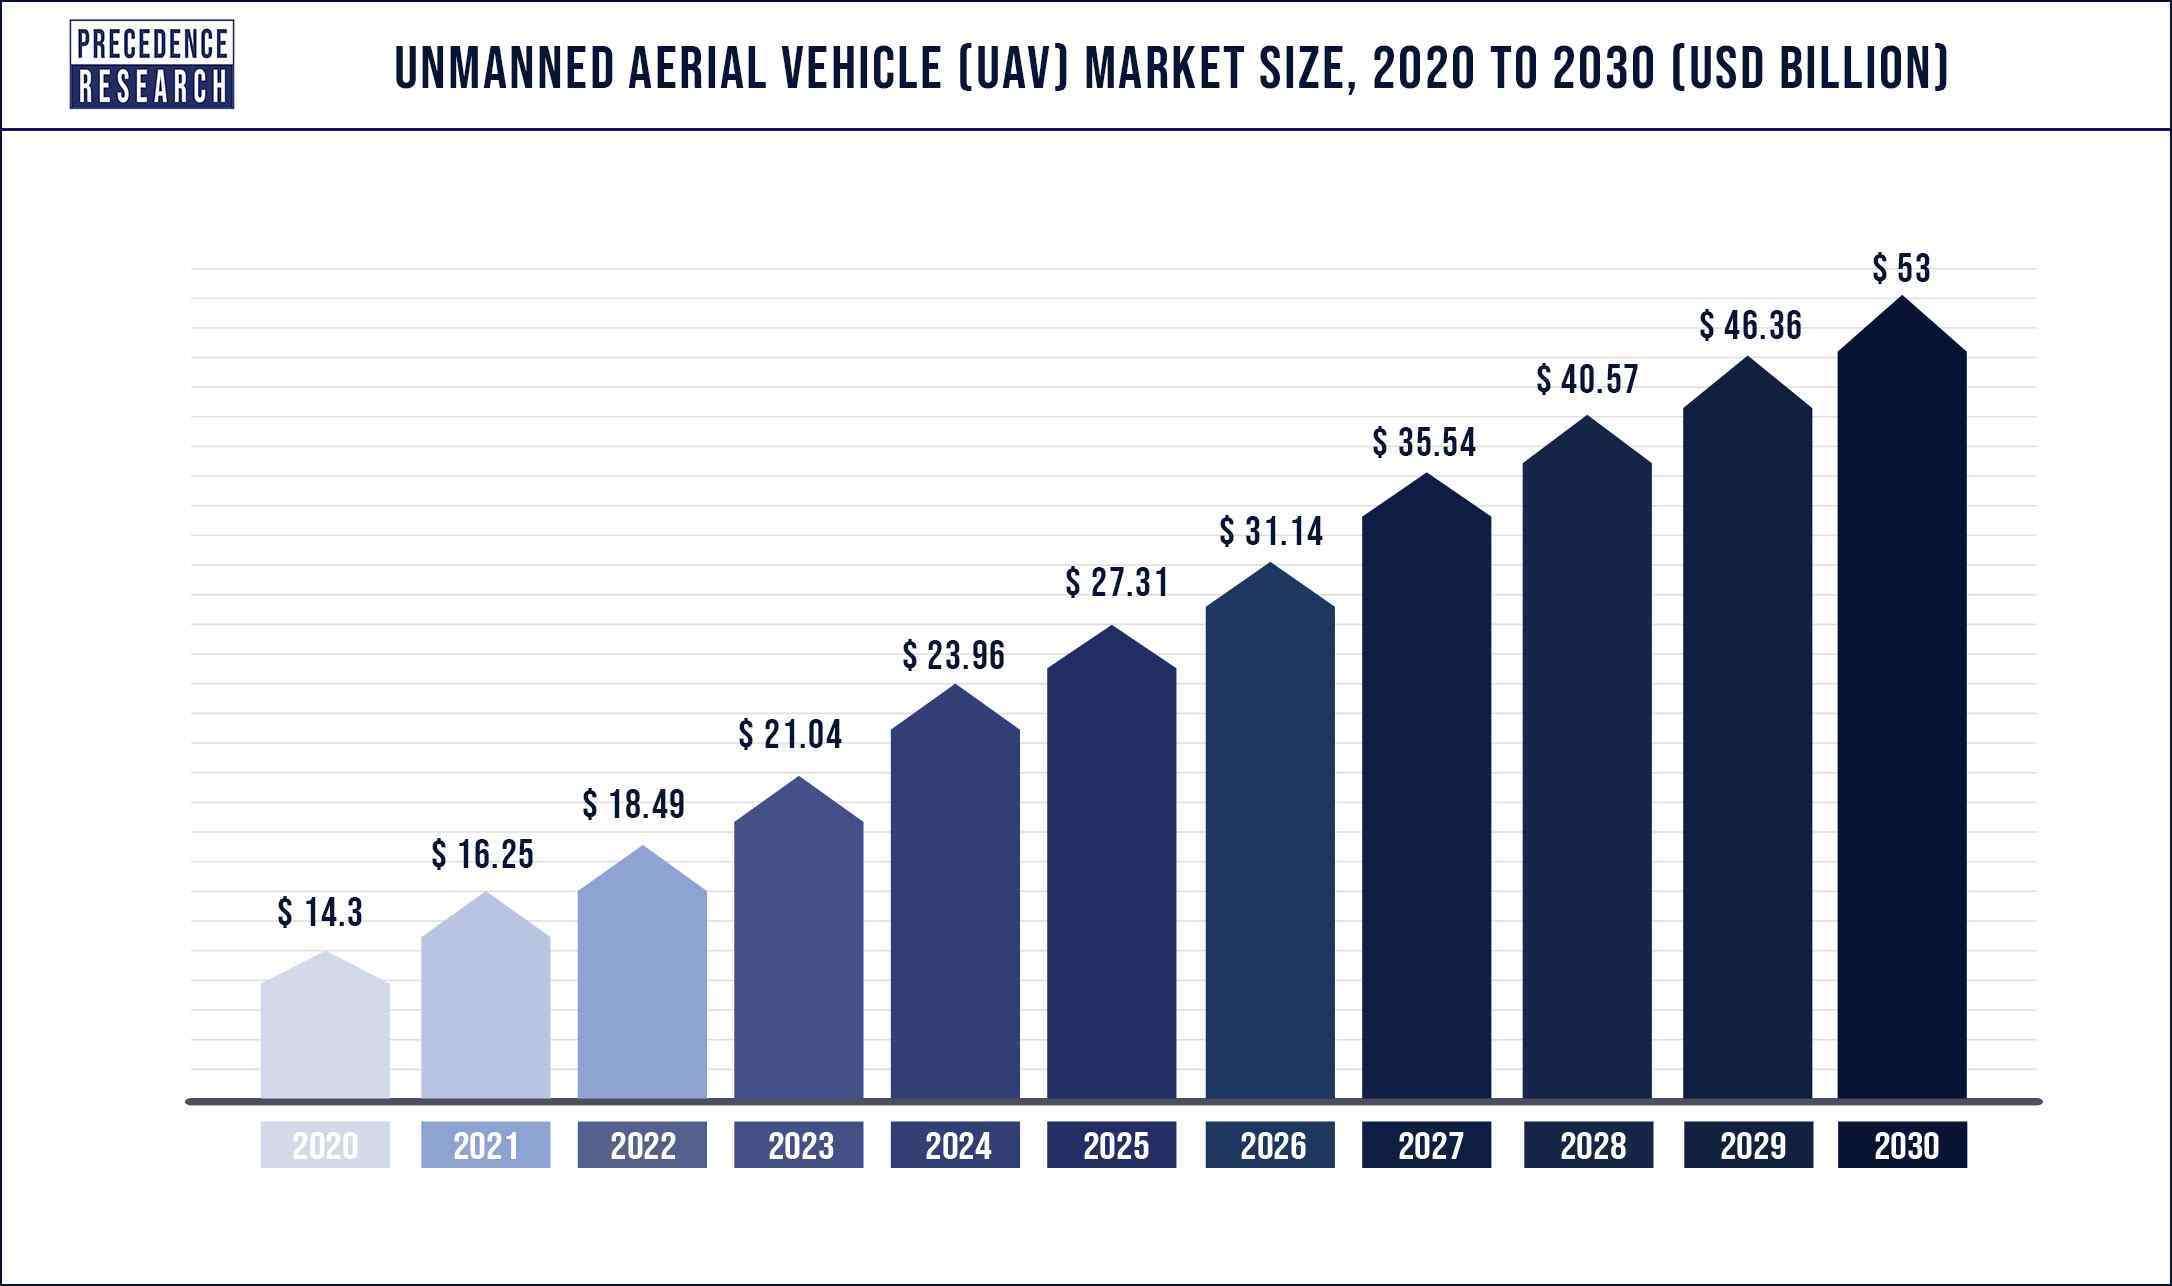 Unmanned Aerial Vehicle (UAV) Market Size 2022 to 2030